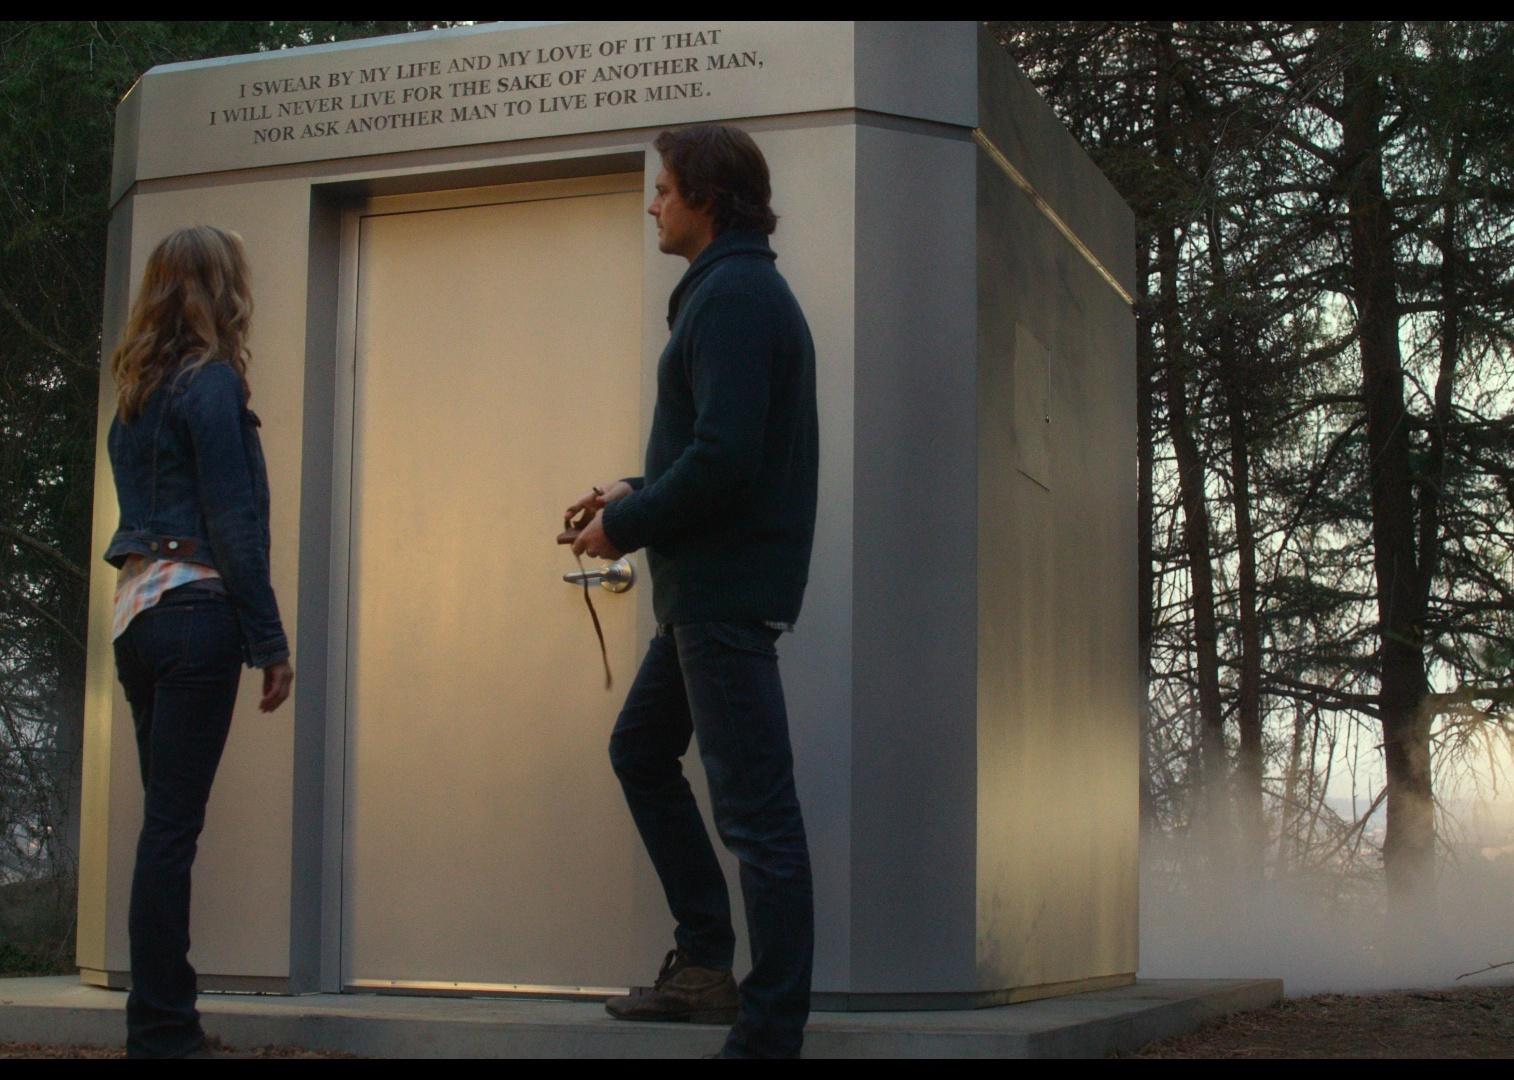 A man and woman stand in front of a giant square metal box in the woods with writing on the front.